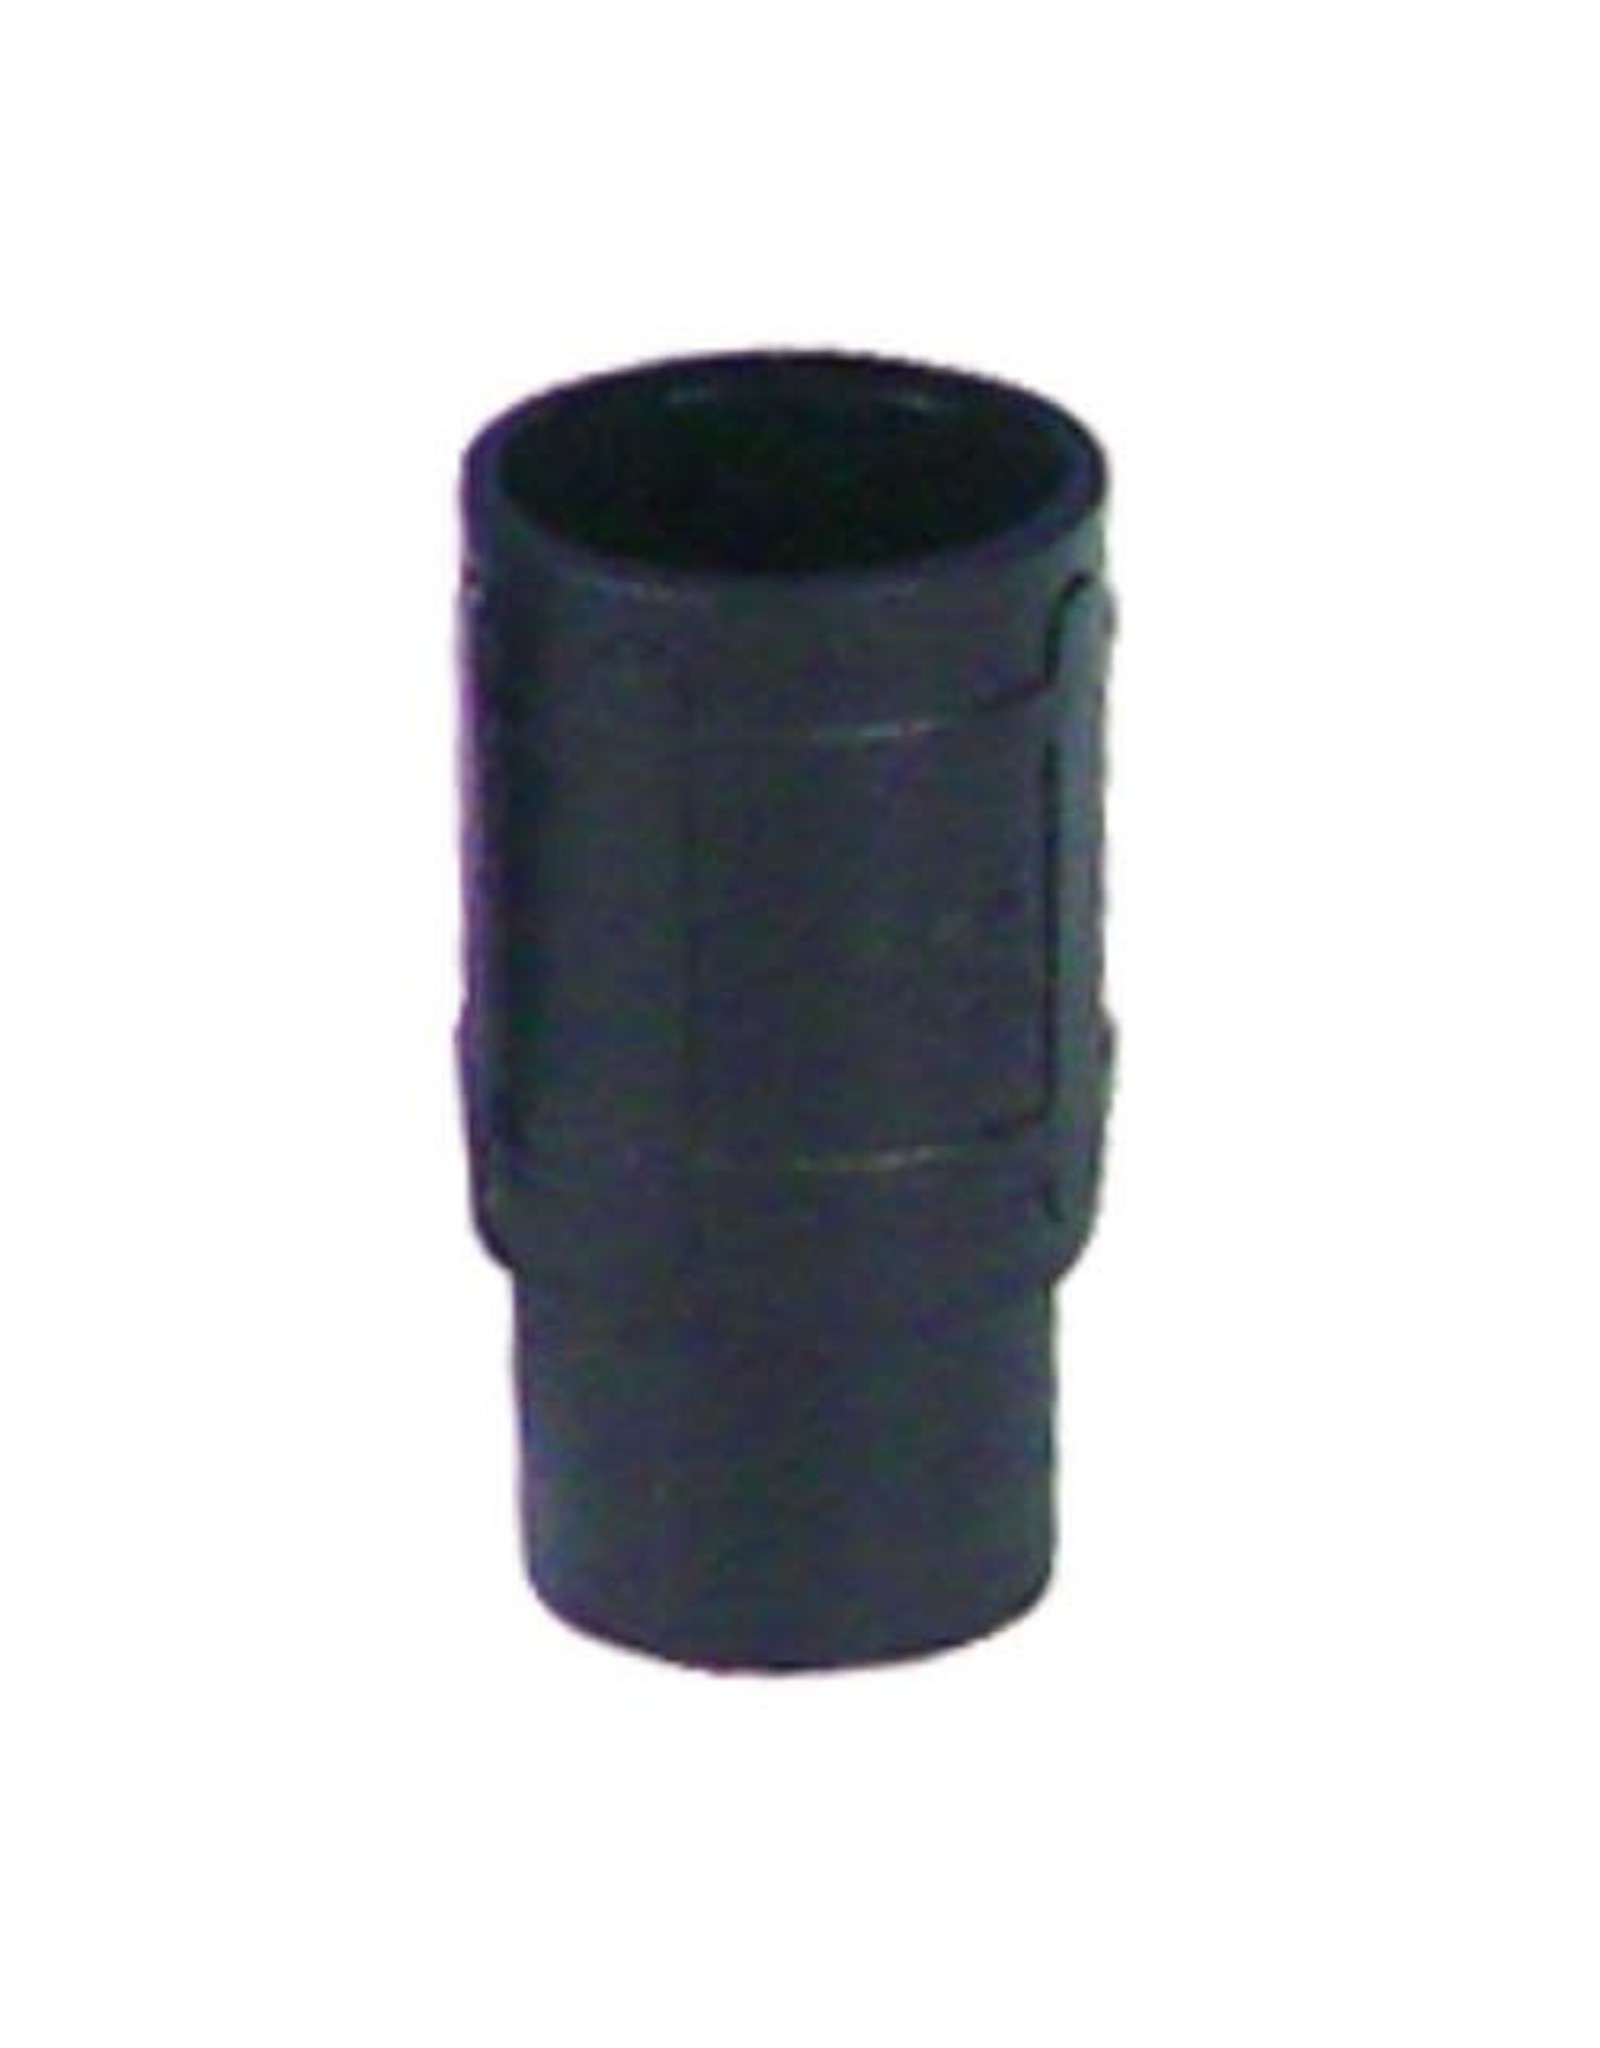 Hydro Flow Hydro Flow Ebb & Flow Outlet Extension Fitting